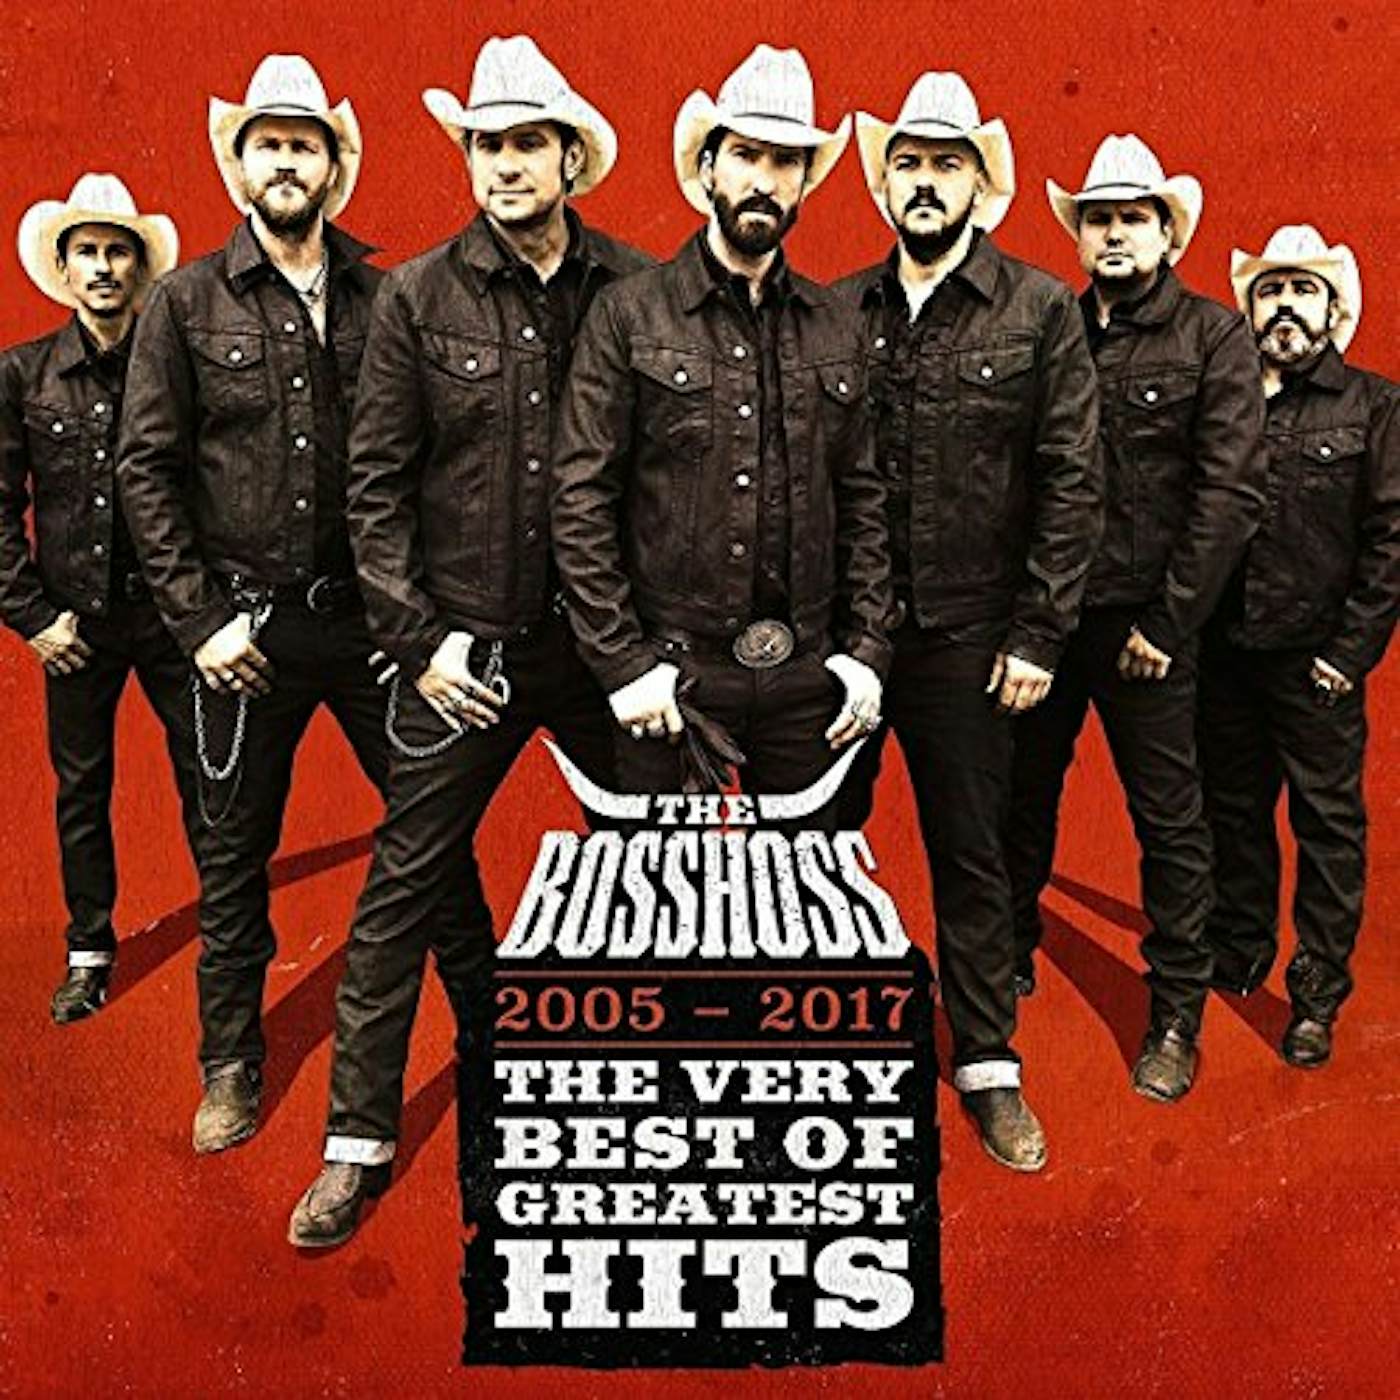 The BossHoss VERY BEST OF GREATEST HITS 2005-2017 CD